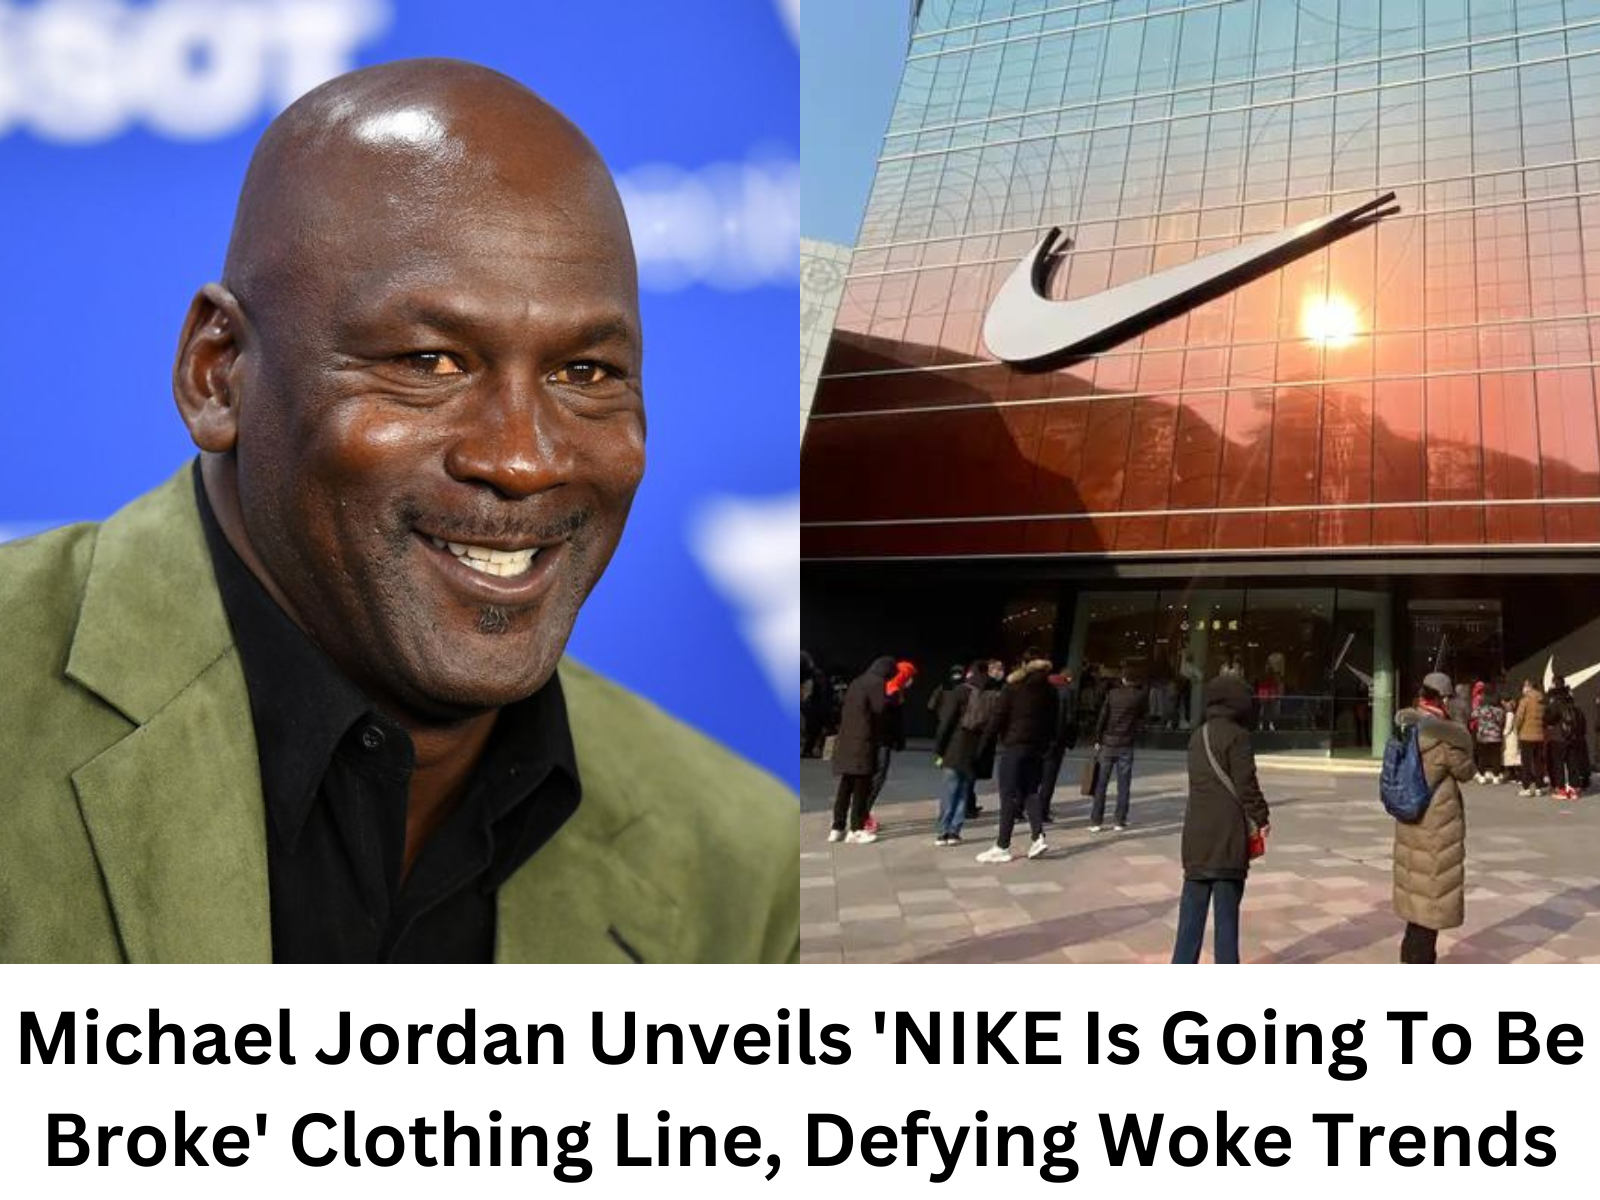 Michael Jordan Slam Dunks Woke Culture with Launch of ‘NIKE Is Going To Be Broke’ Clothing Line